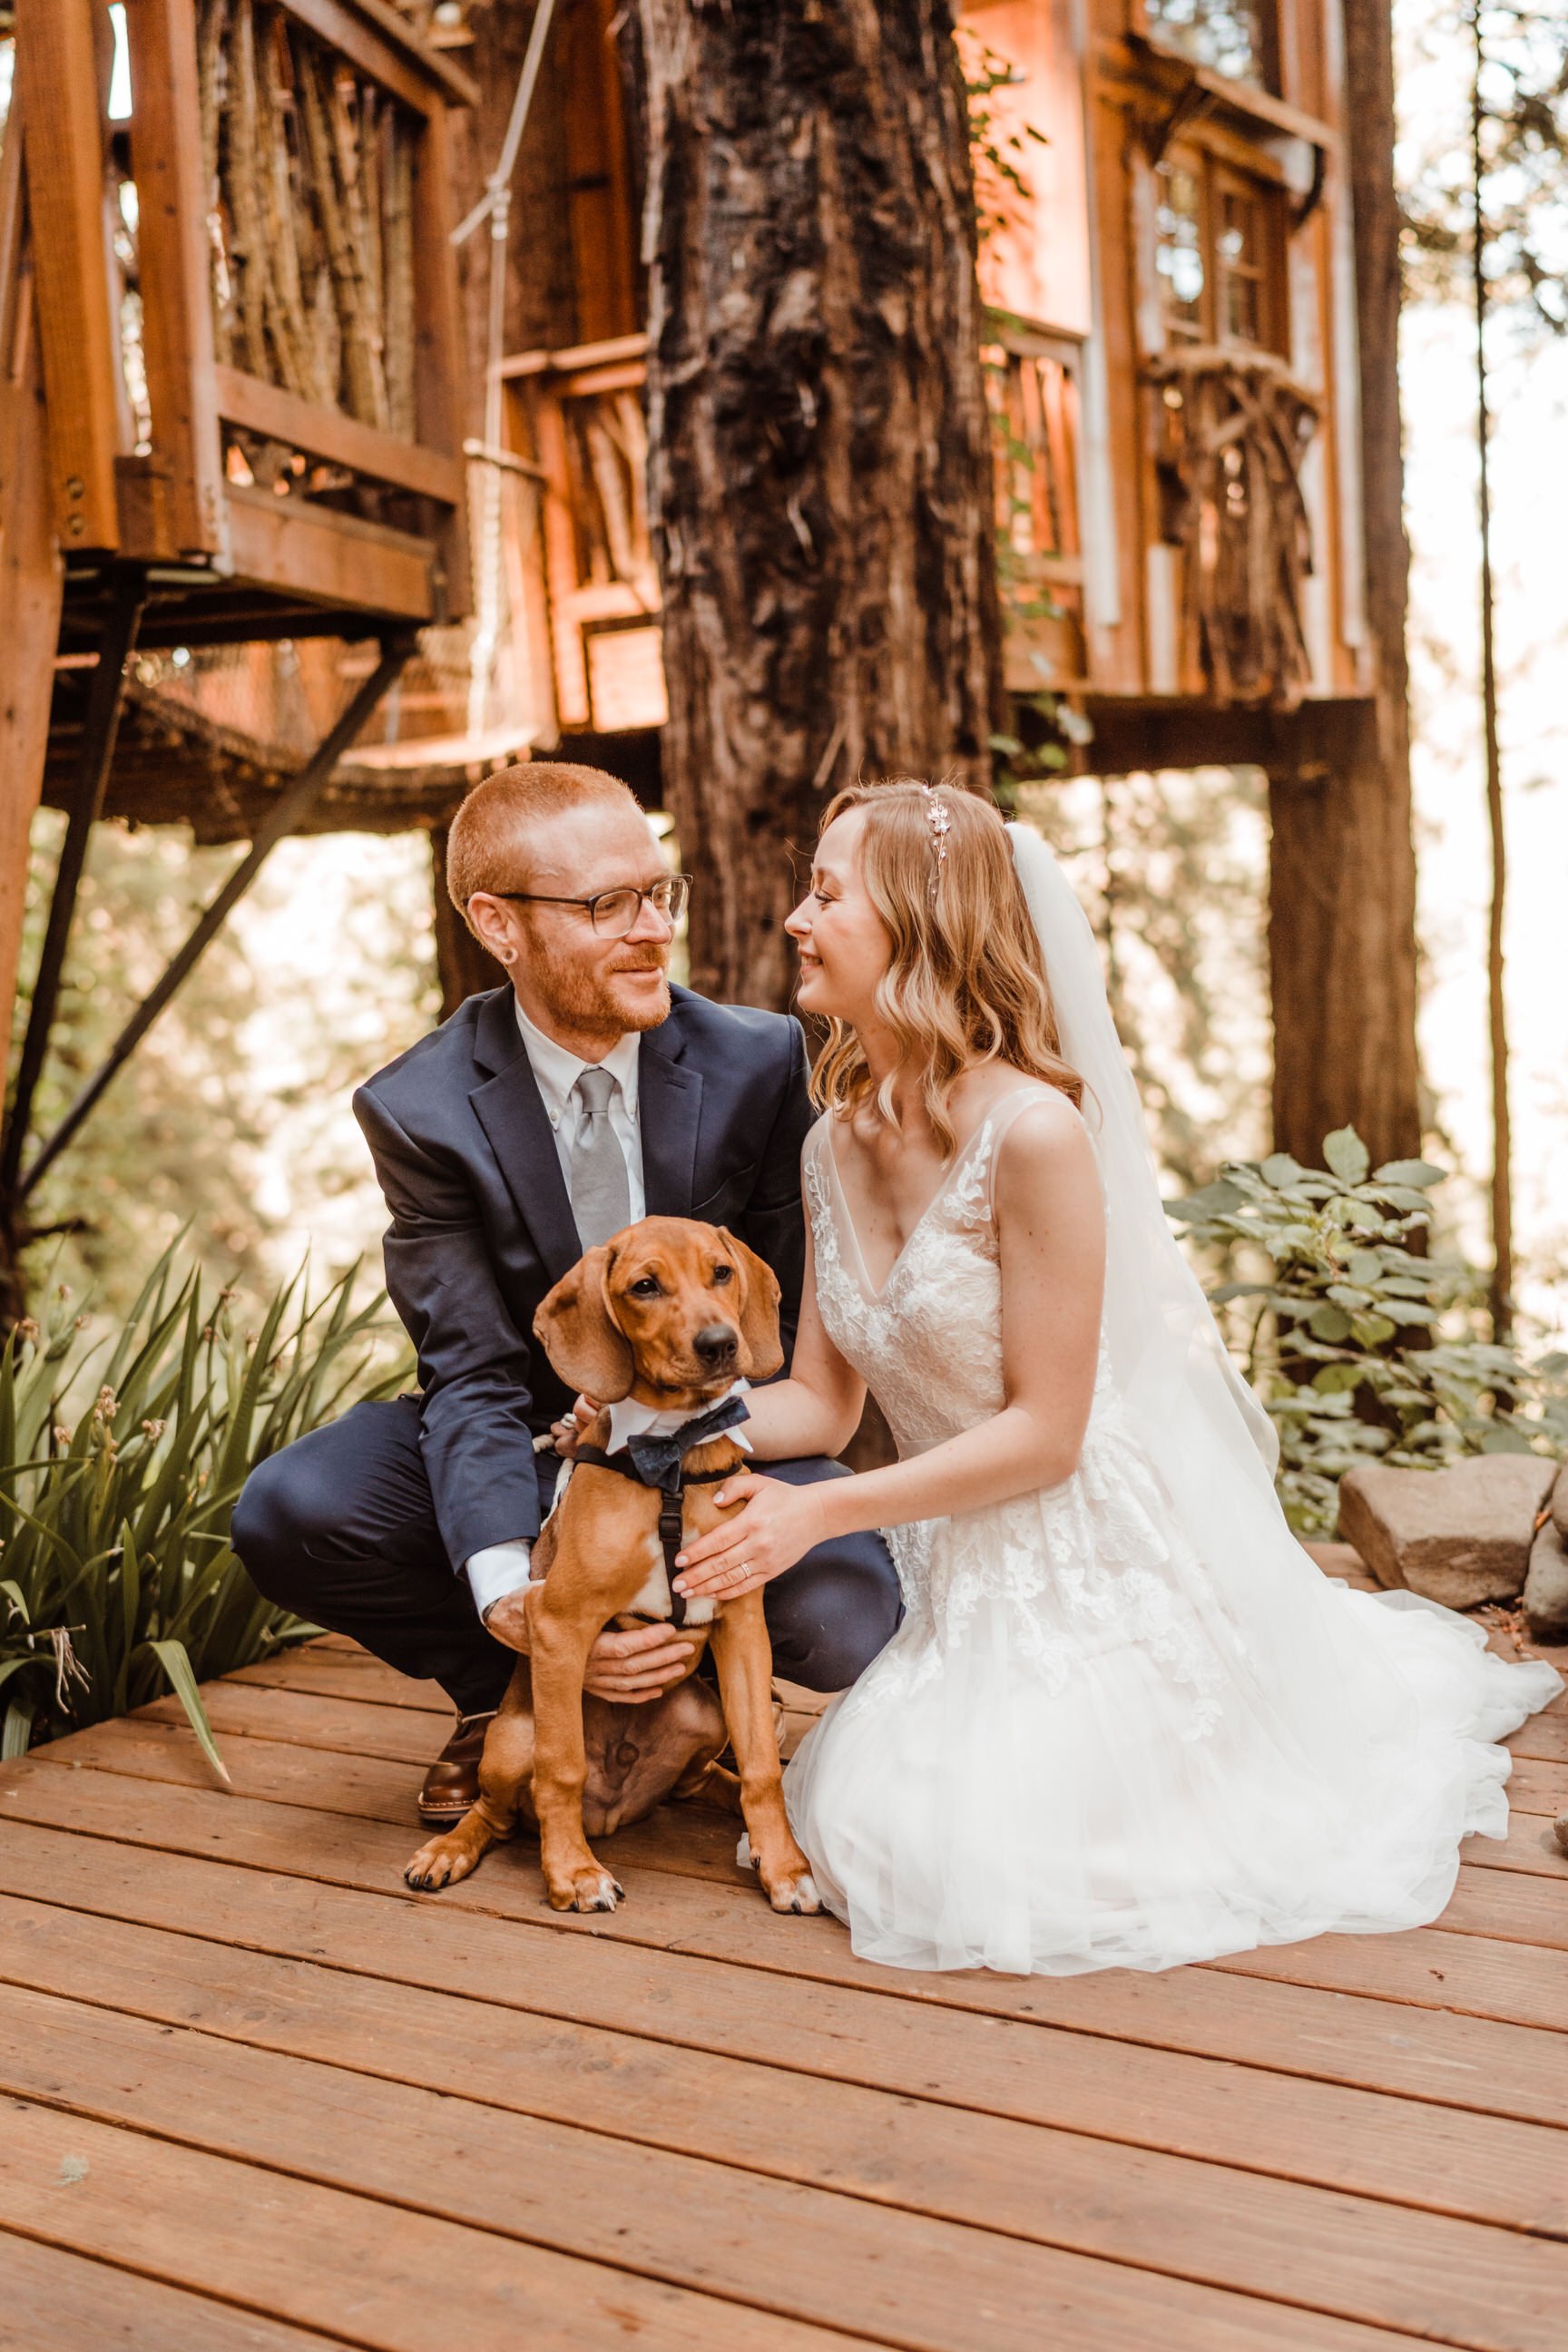 Wedding-in-the-Woods-Bride-and-Groom-Holding-Rescue-Puppy-at-Elopement-beneath-Redwood-Trees (5).jpg